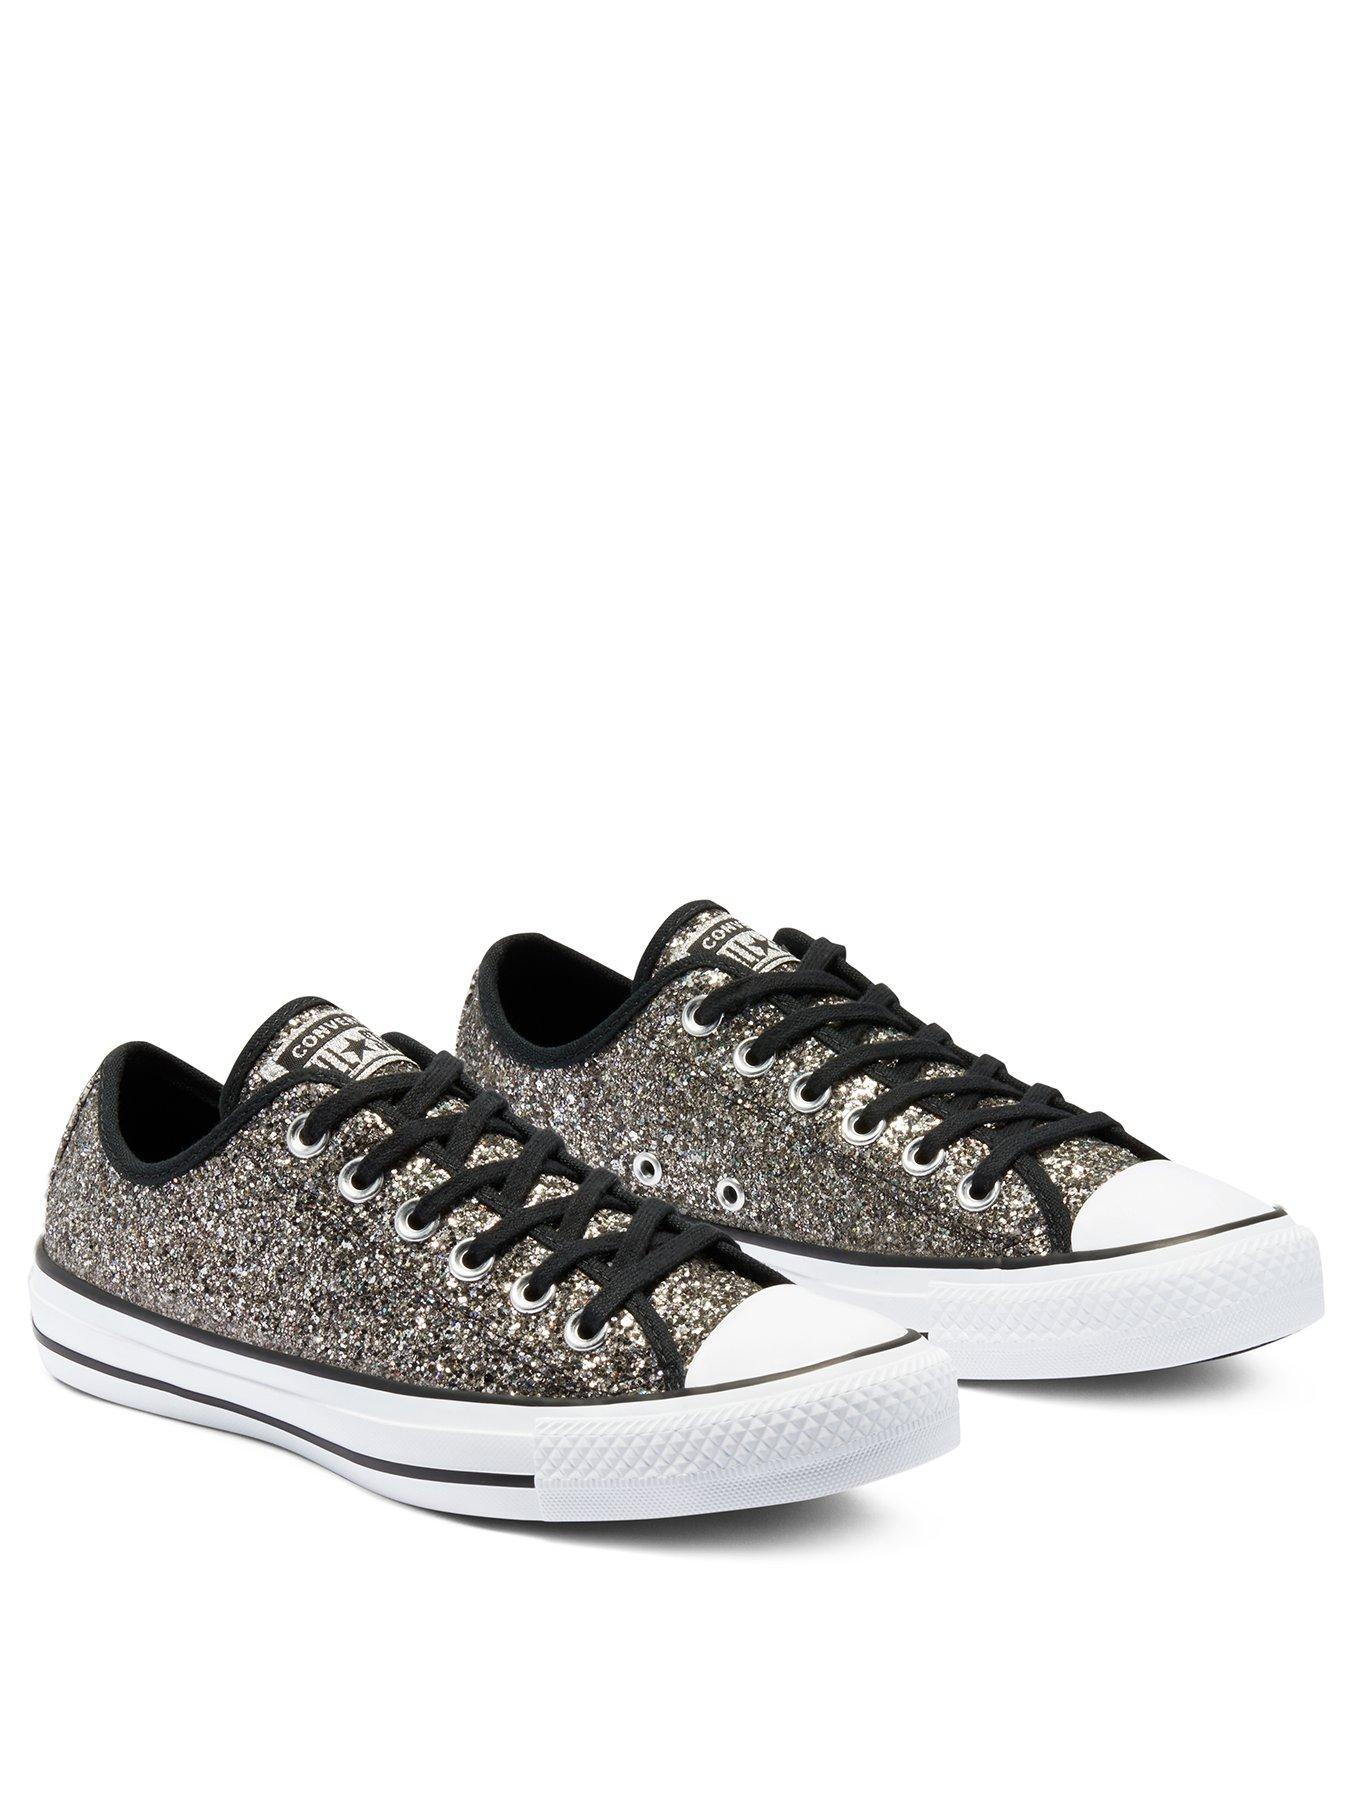 converse ox sequins womens trainers